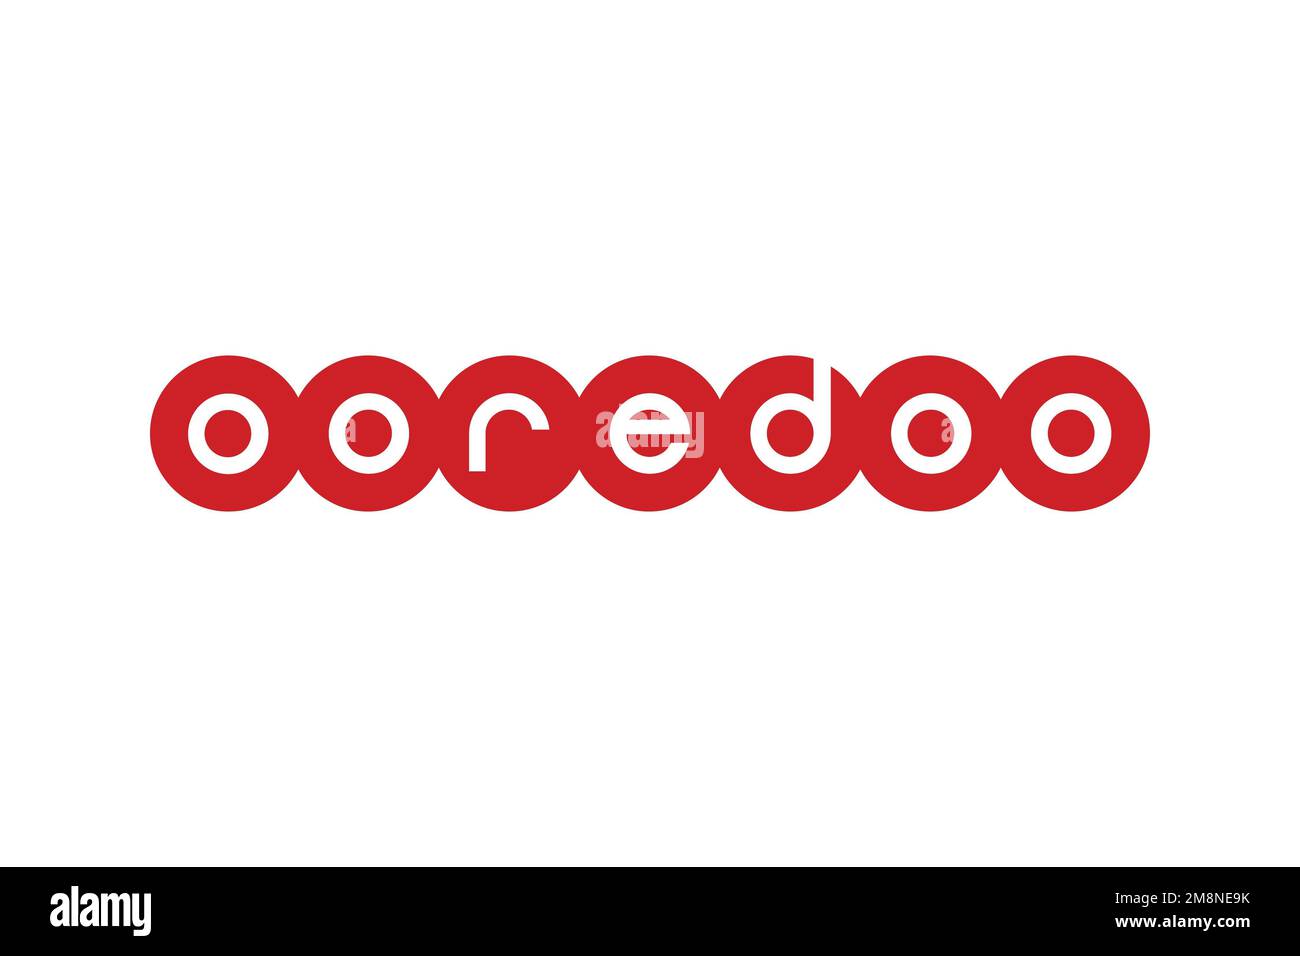 File:Ooredoo-logo-red.svg - Wikipedia